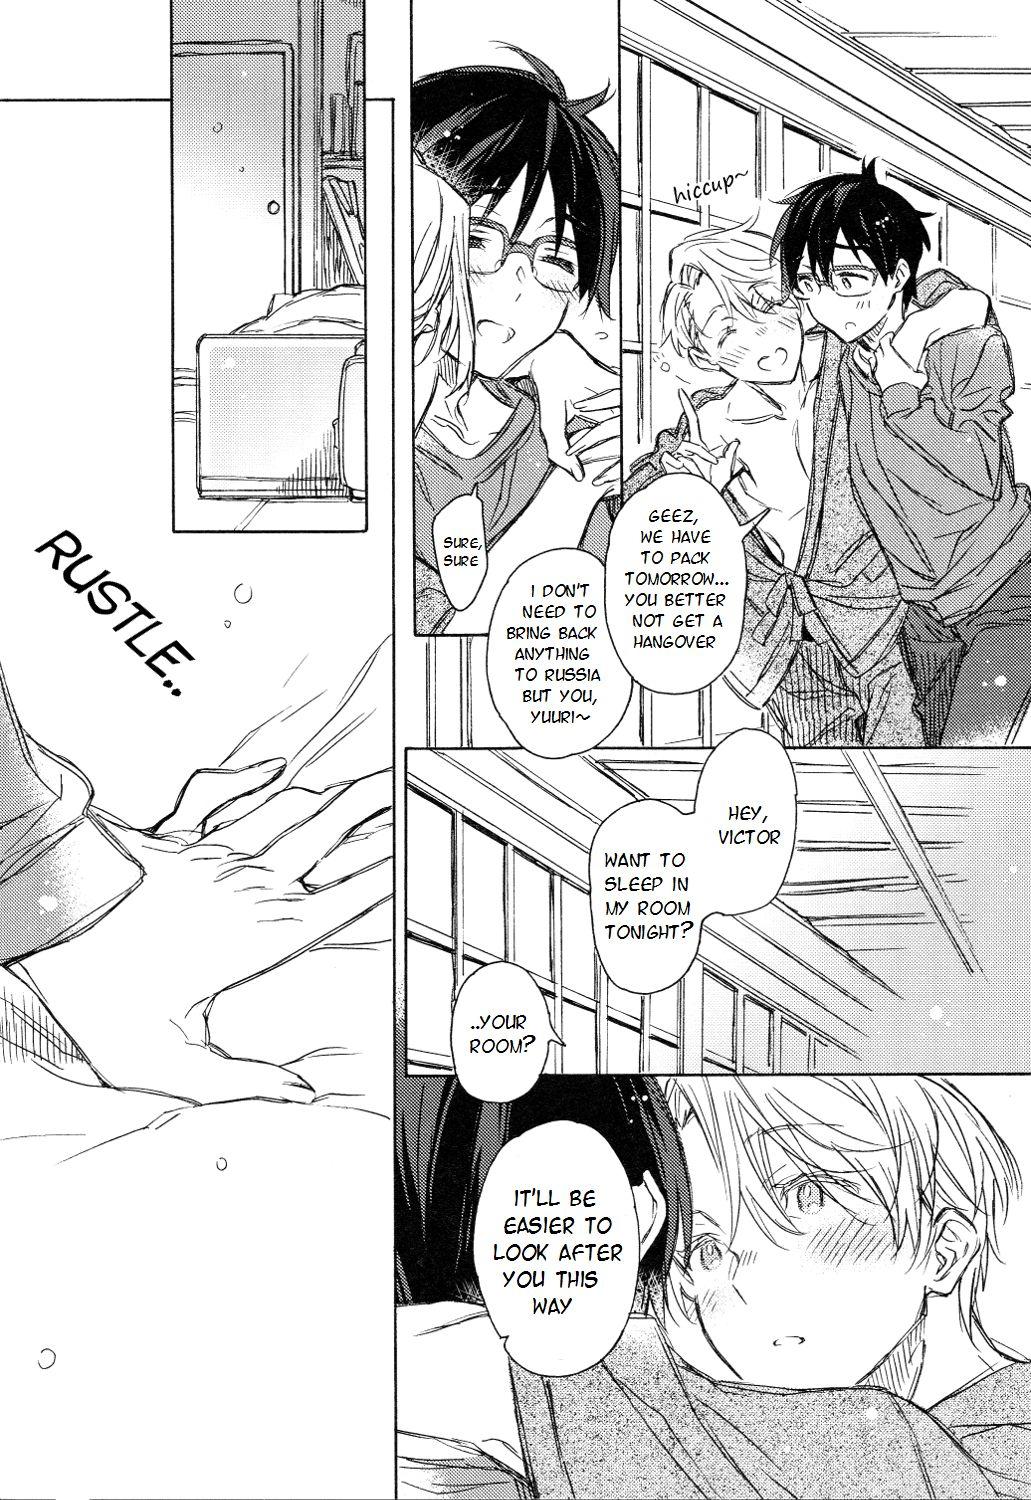 Toying BRAND NEW DAY,BRAND NEW LIFE - Yuri on ice Couple Sex - Page 7